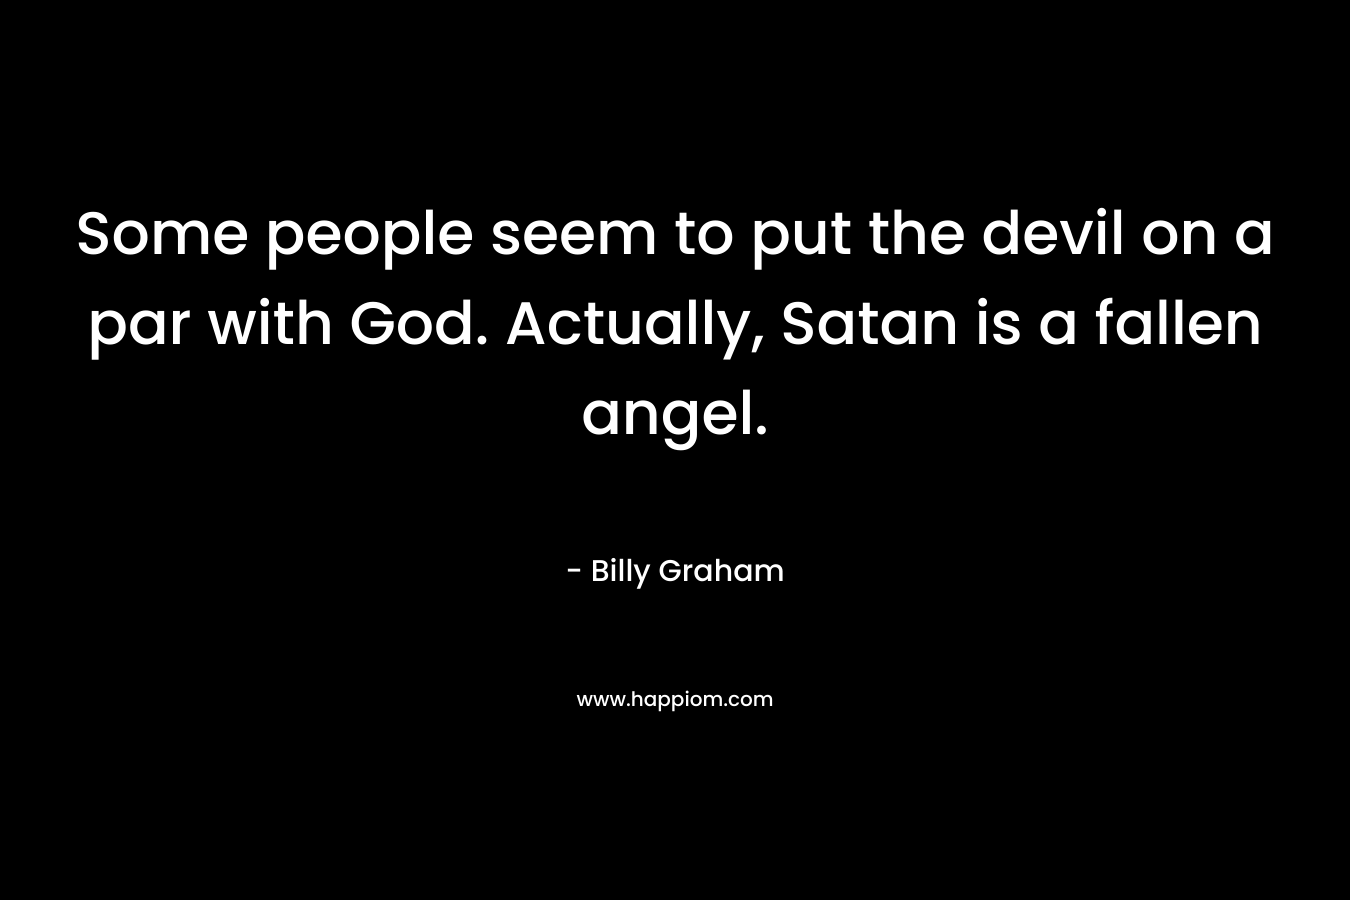 Some people seem to put the devil on a par with God. Actually, Satan is a fallen angel.